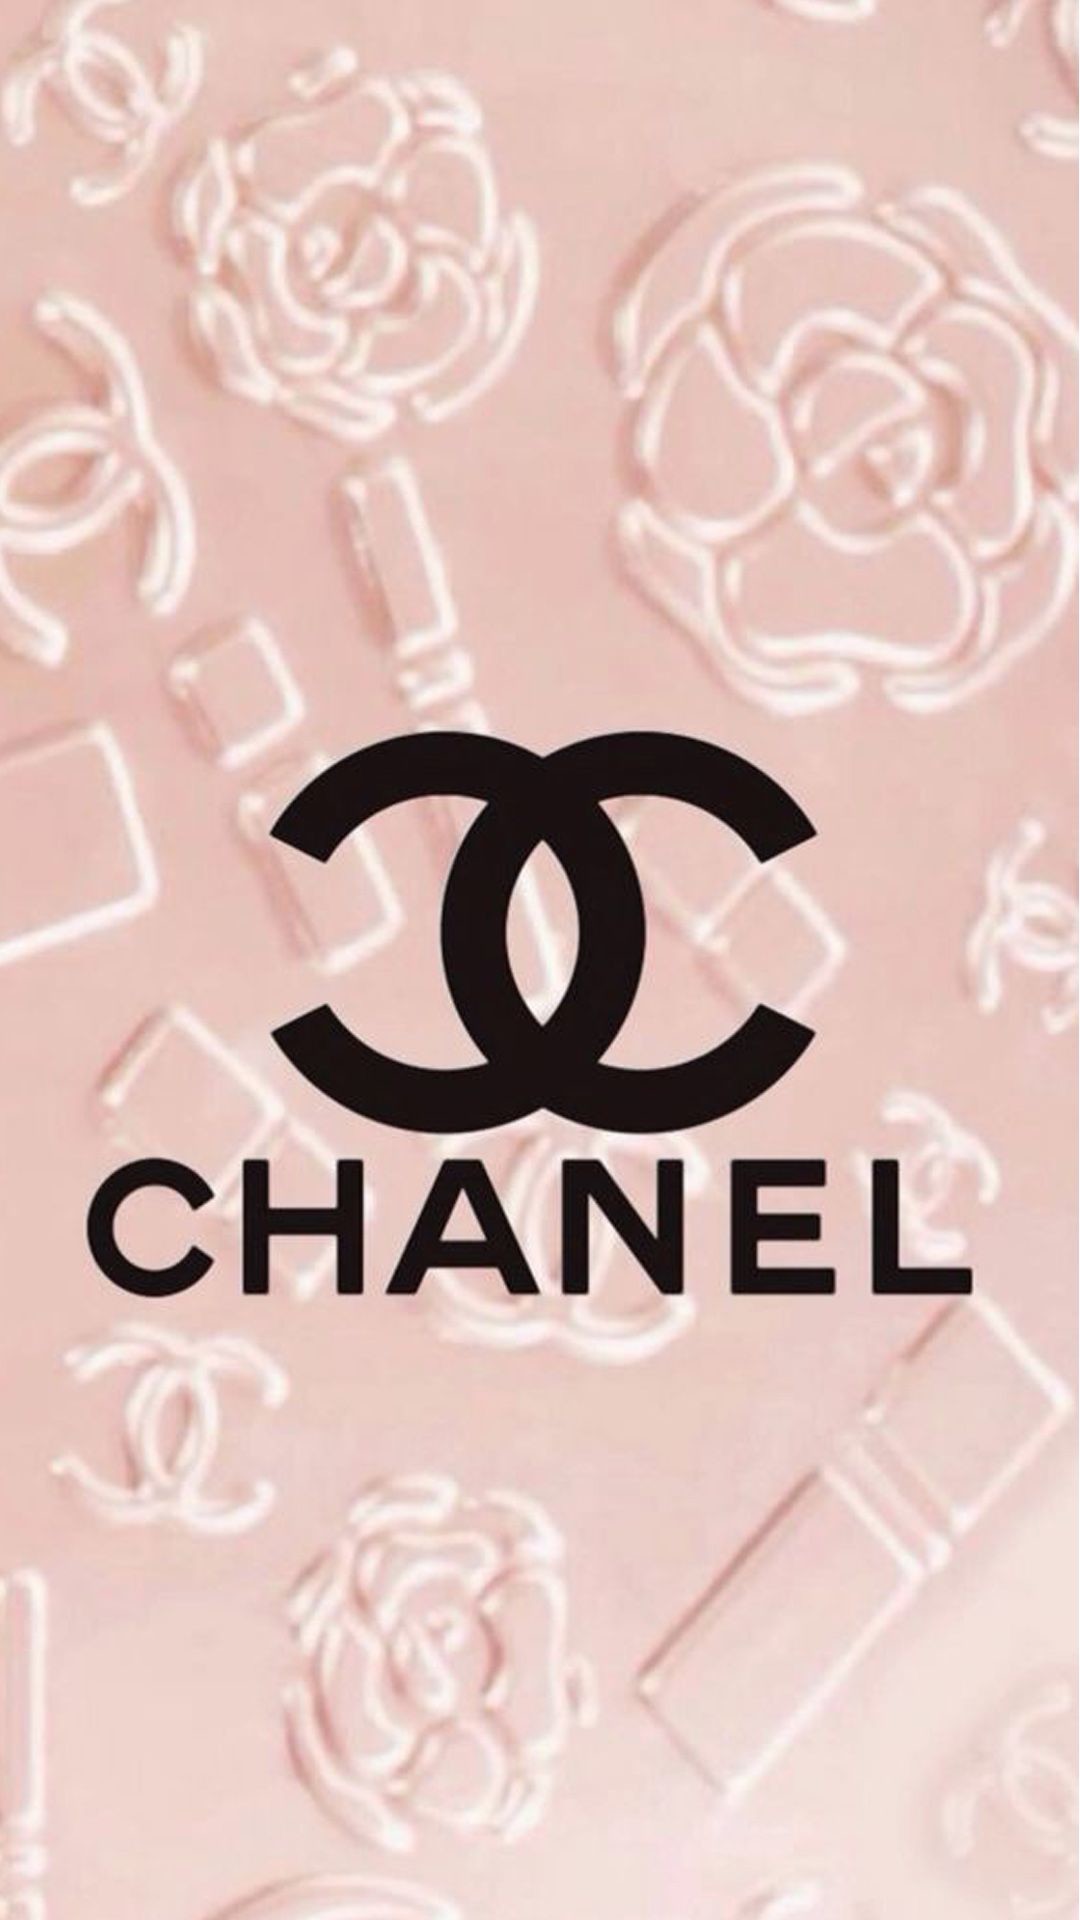 Coco Chanel iPhone Wallpaper (69+ images)